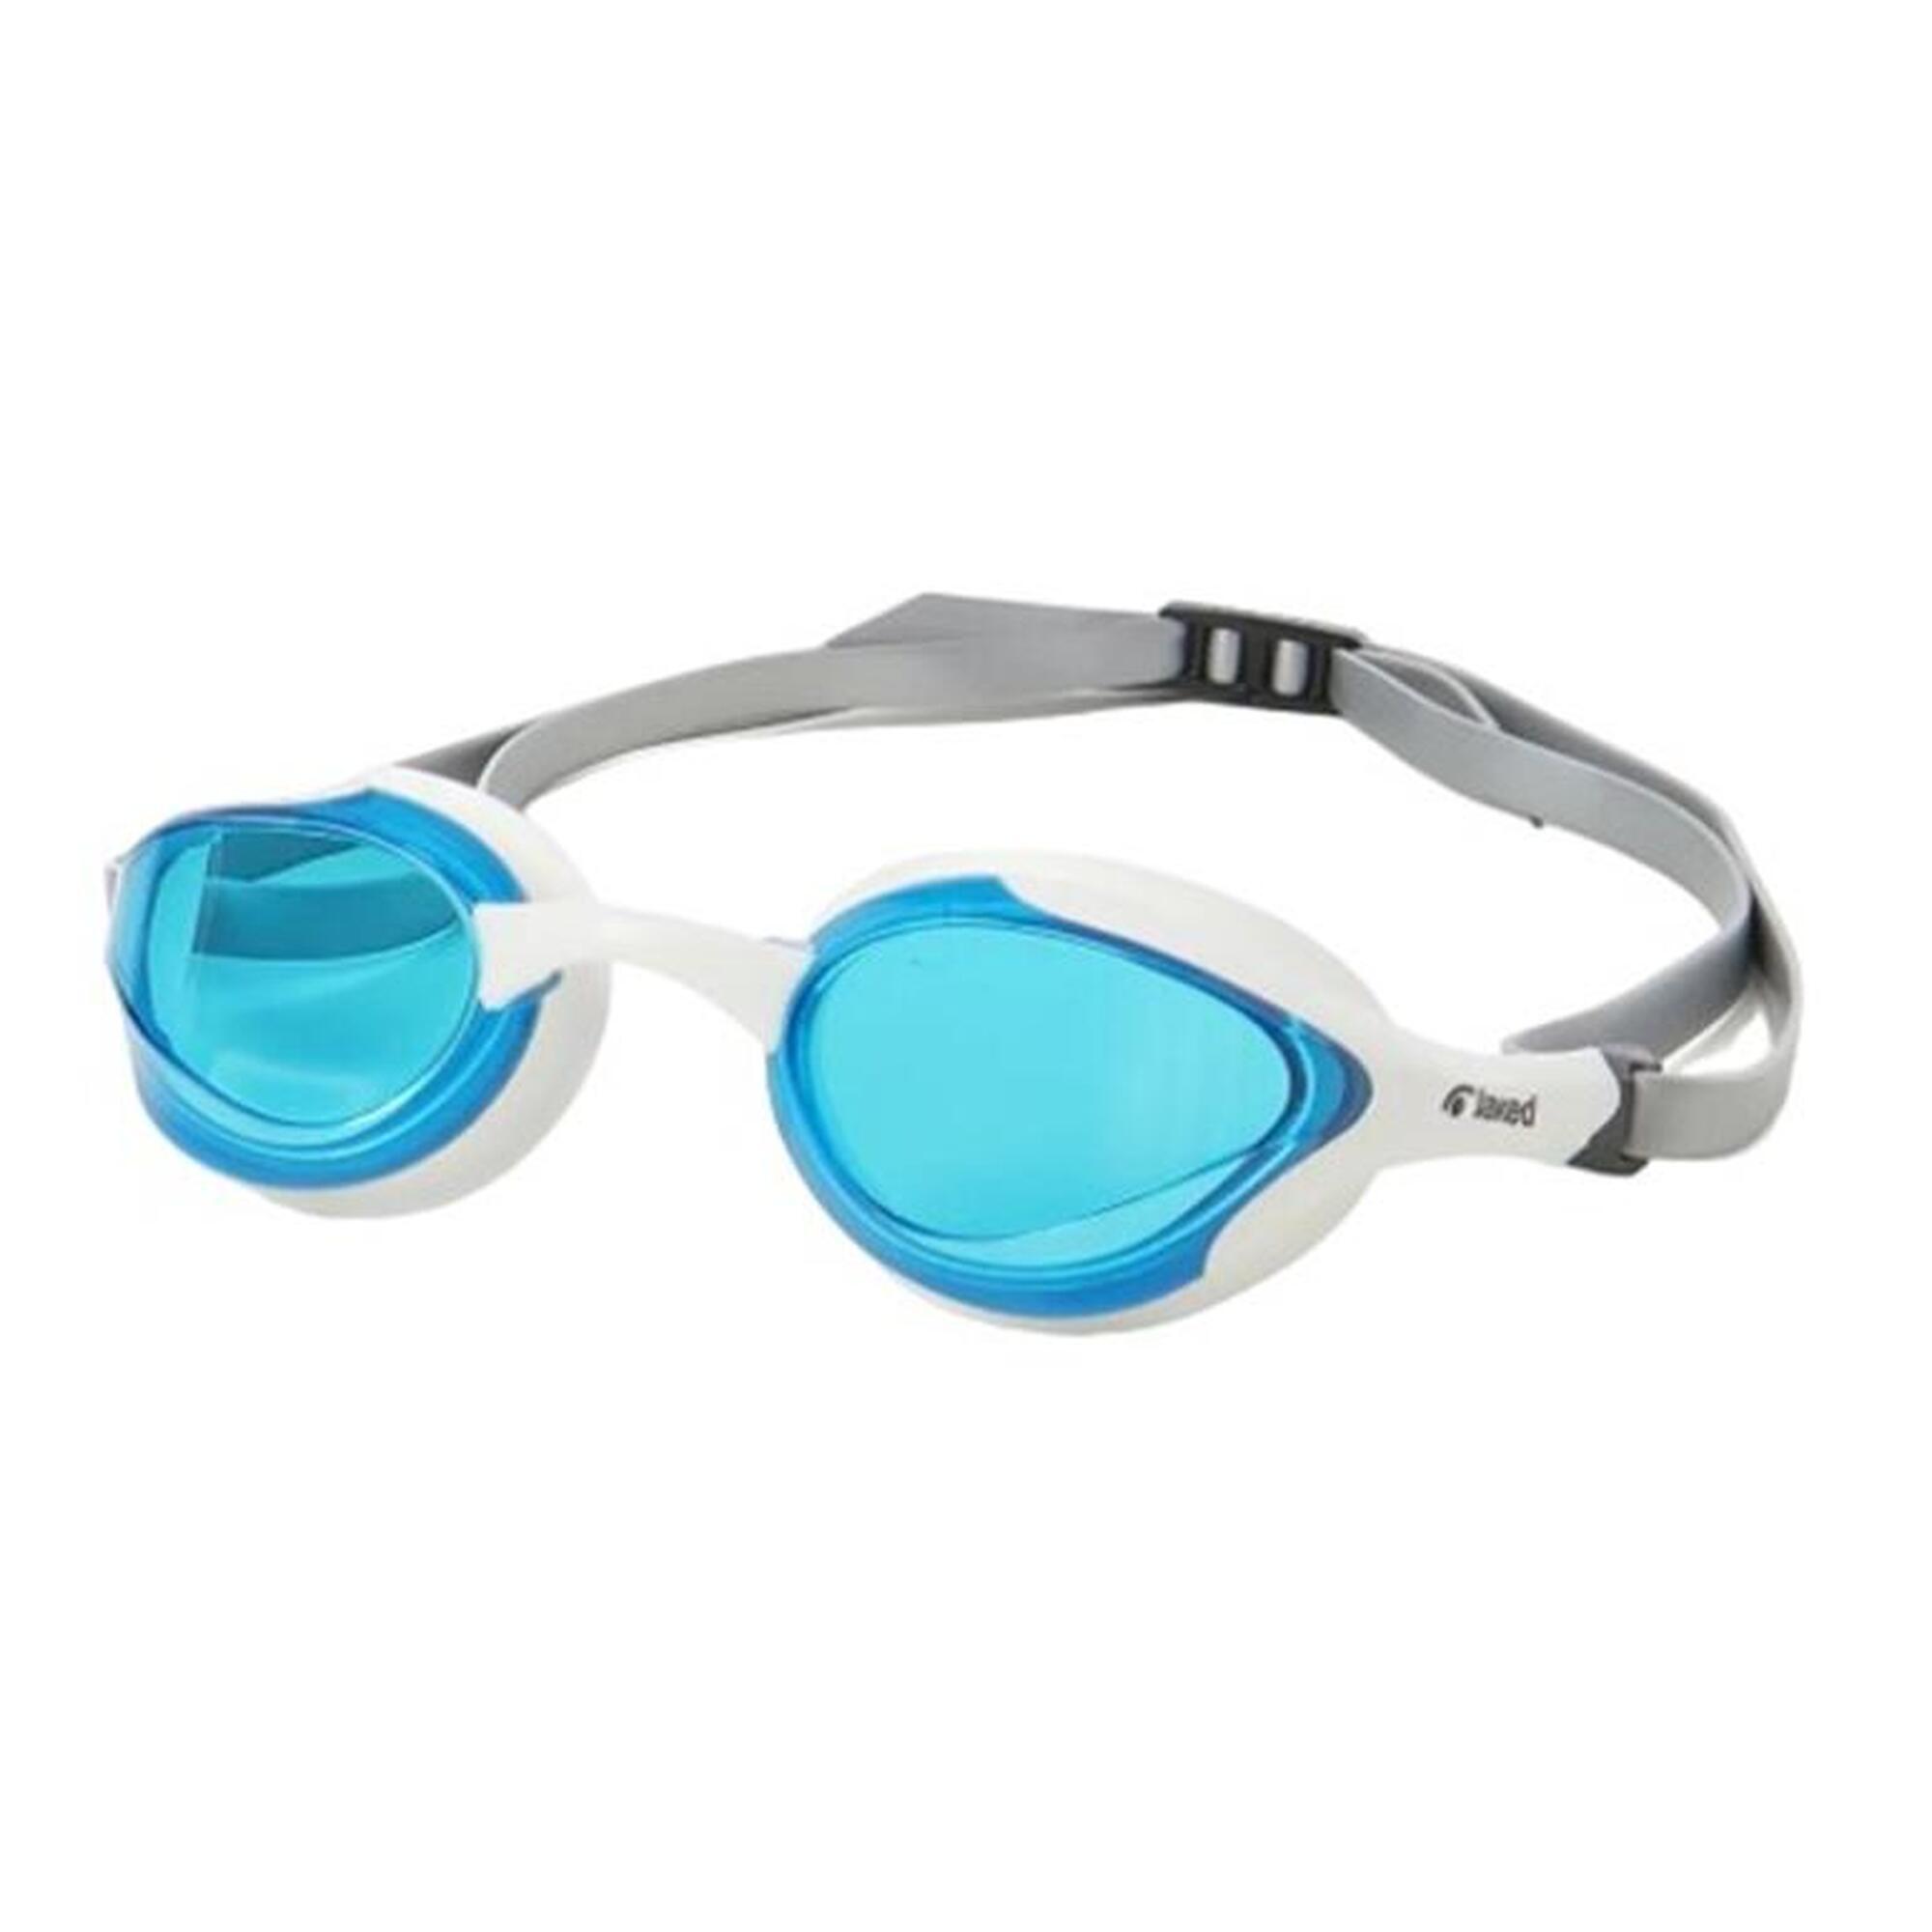 RUMBLE COMPETITION SWIMMING GOGGLES - WHITE